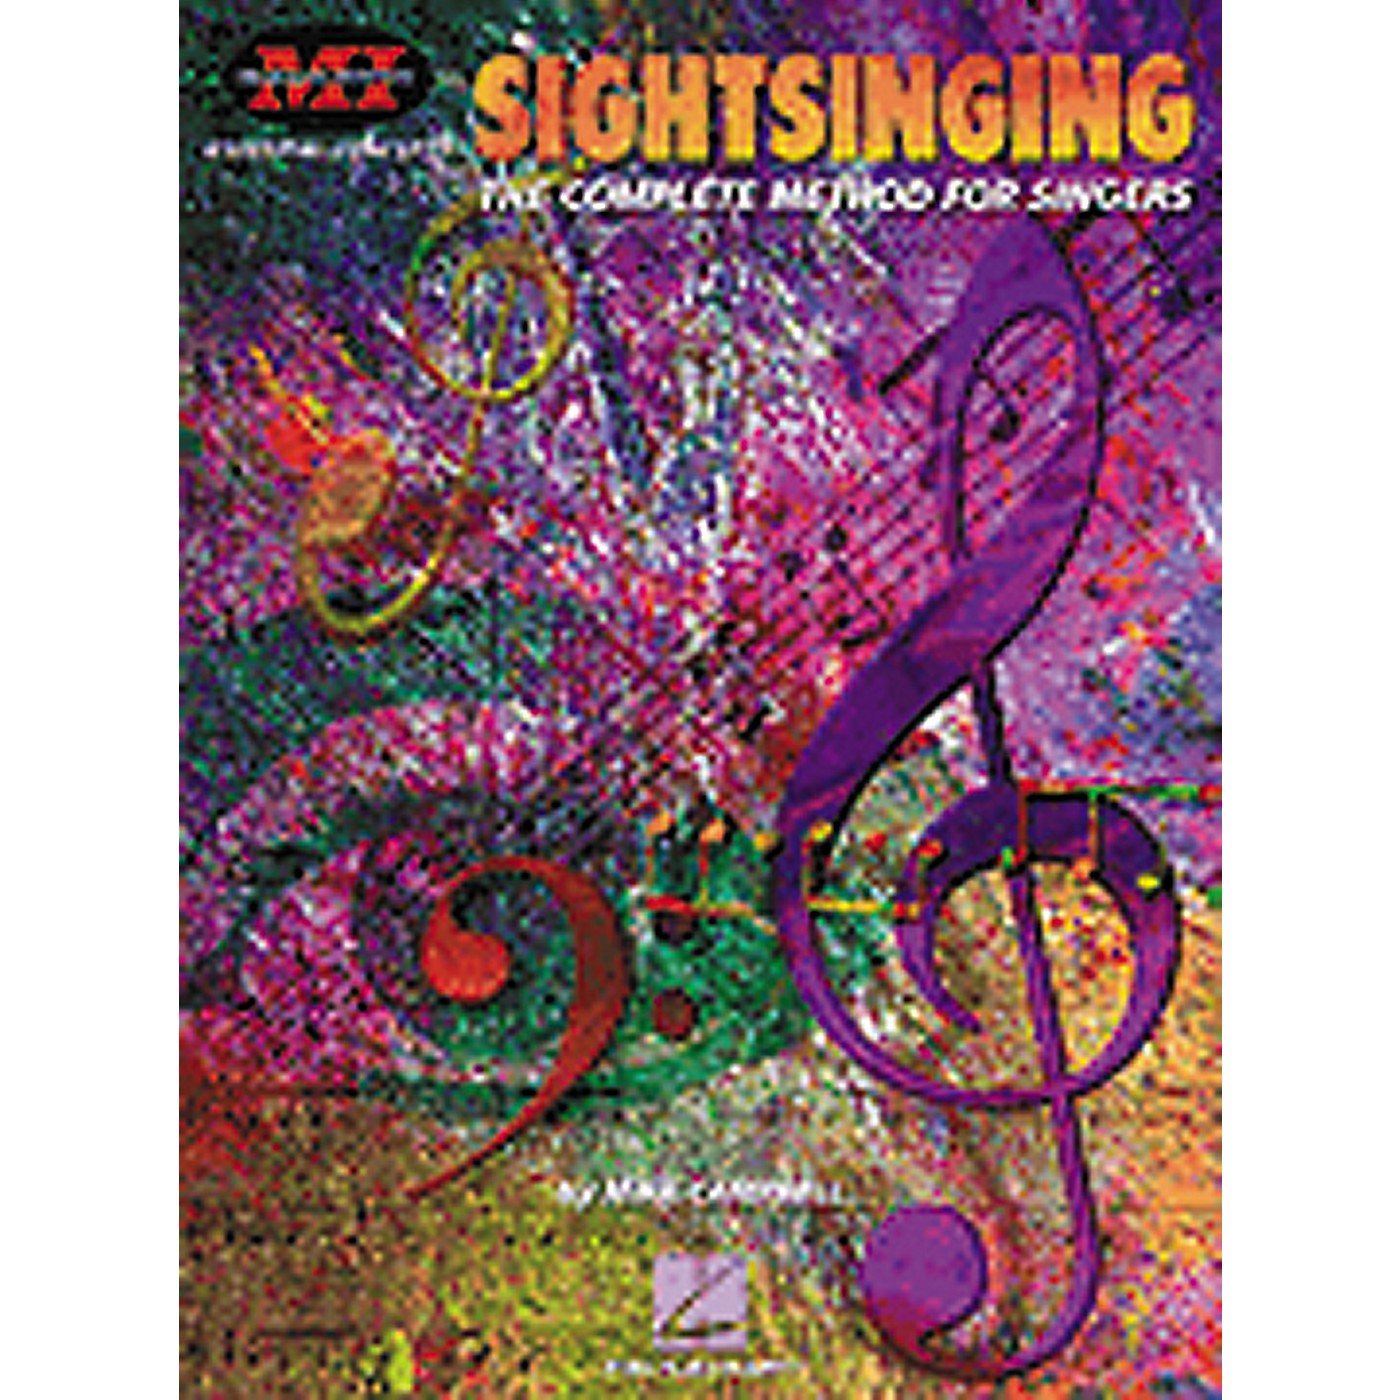 Hal Leonard Sight Singing Book The Complete Method for Singers thumbnail